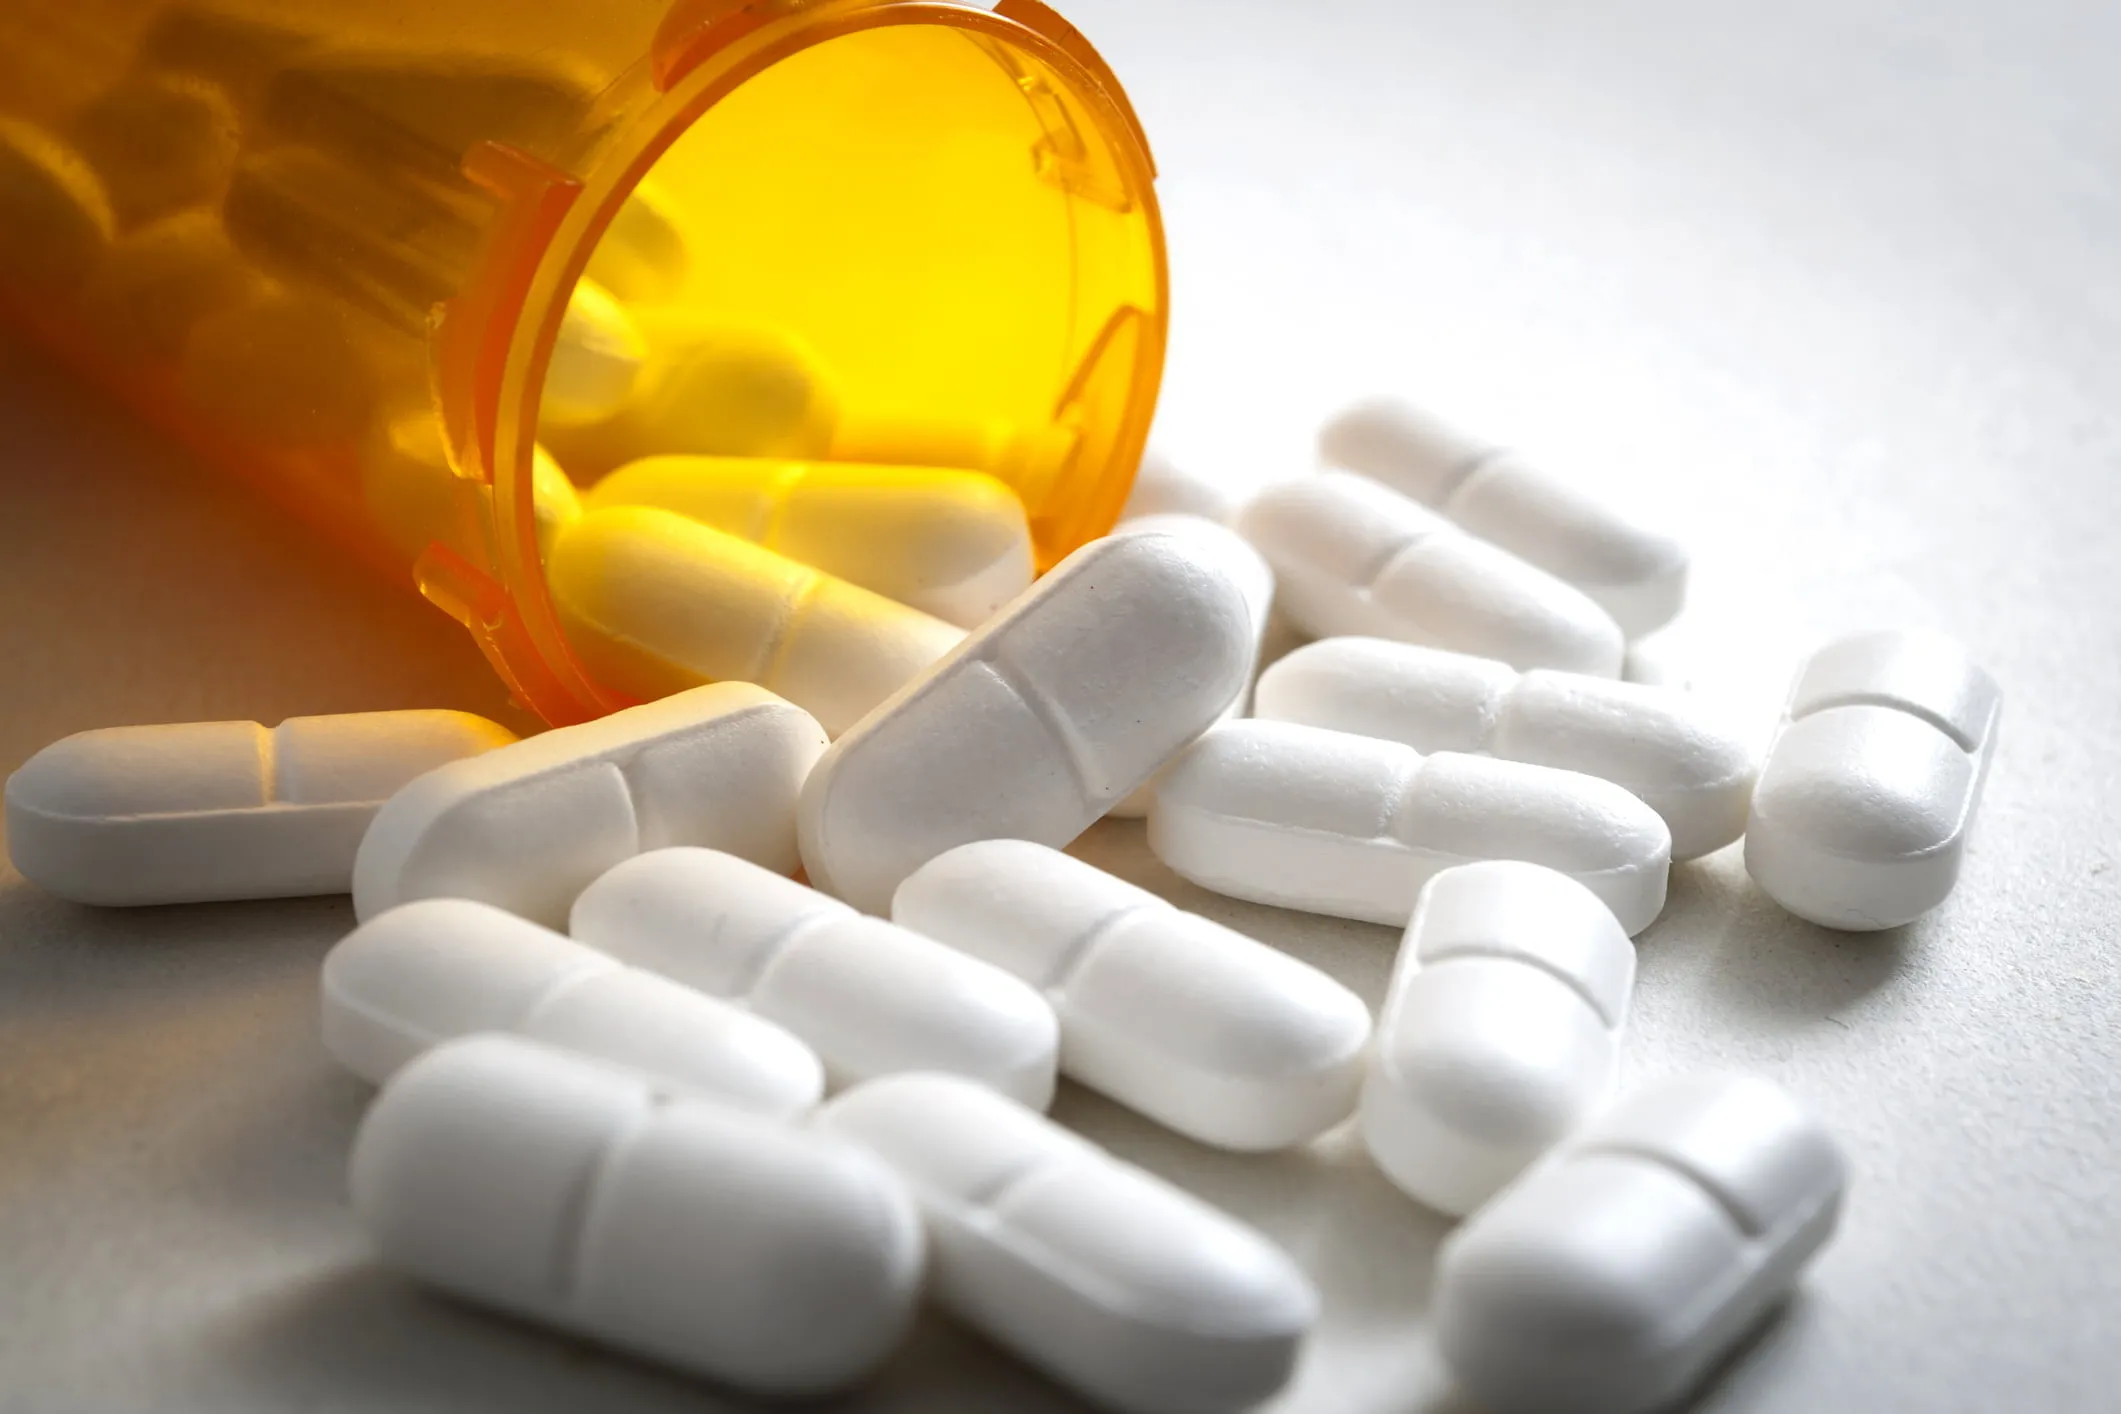 White prescription pills falling out of an orange pill bottle. If you have been injured due to a prescription drug, our team of defective drug lawyers is ready to fight for you. 